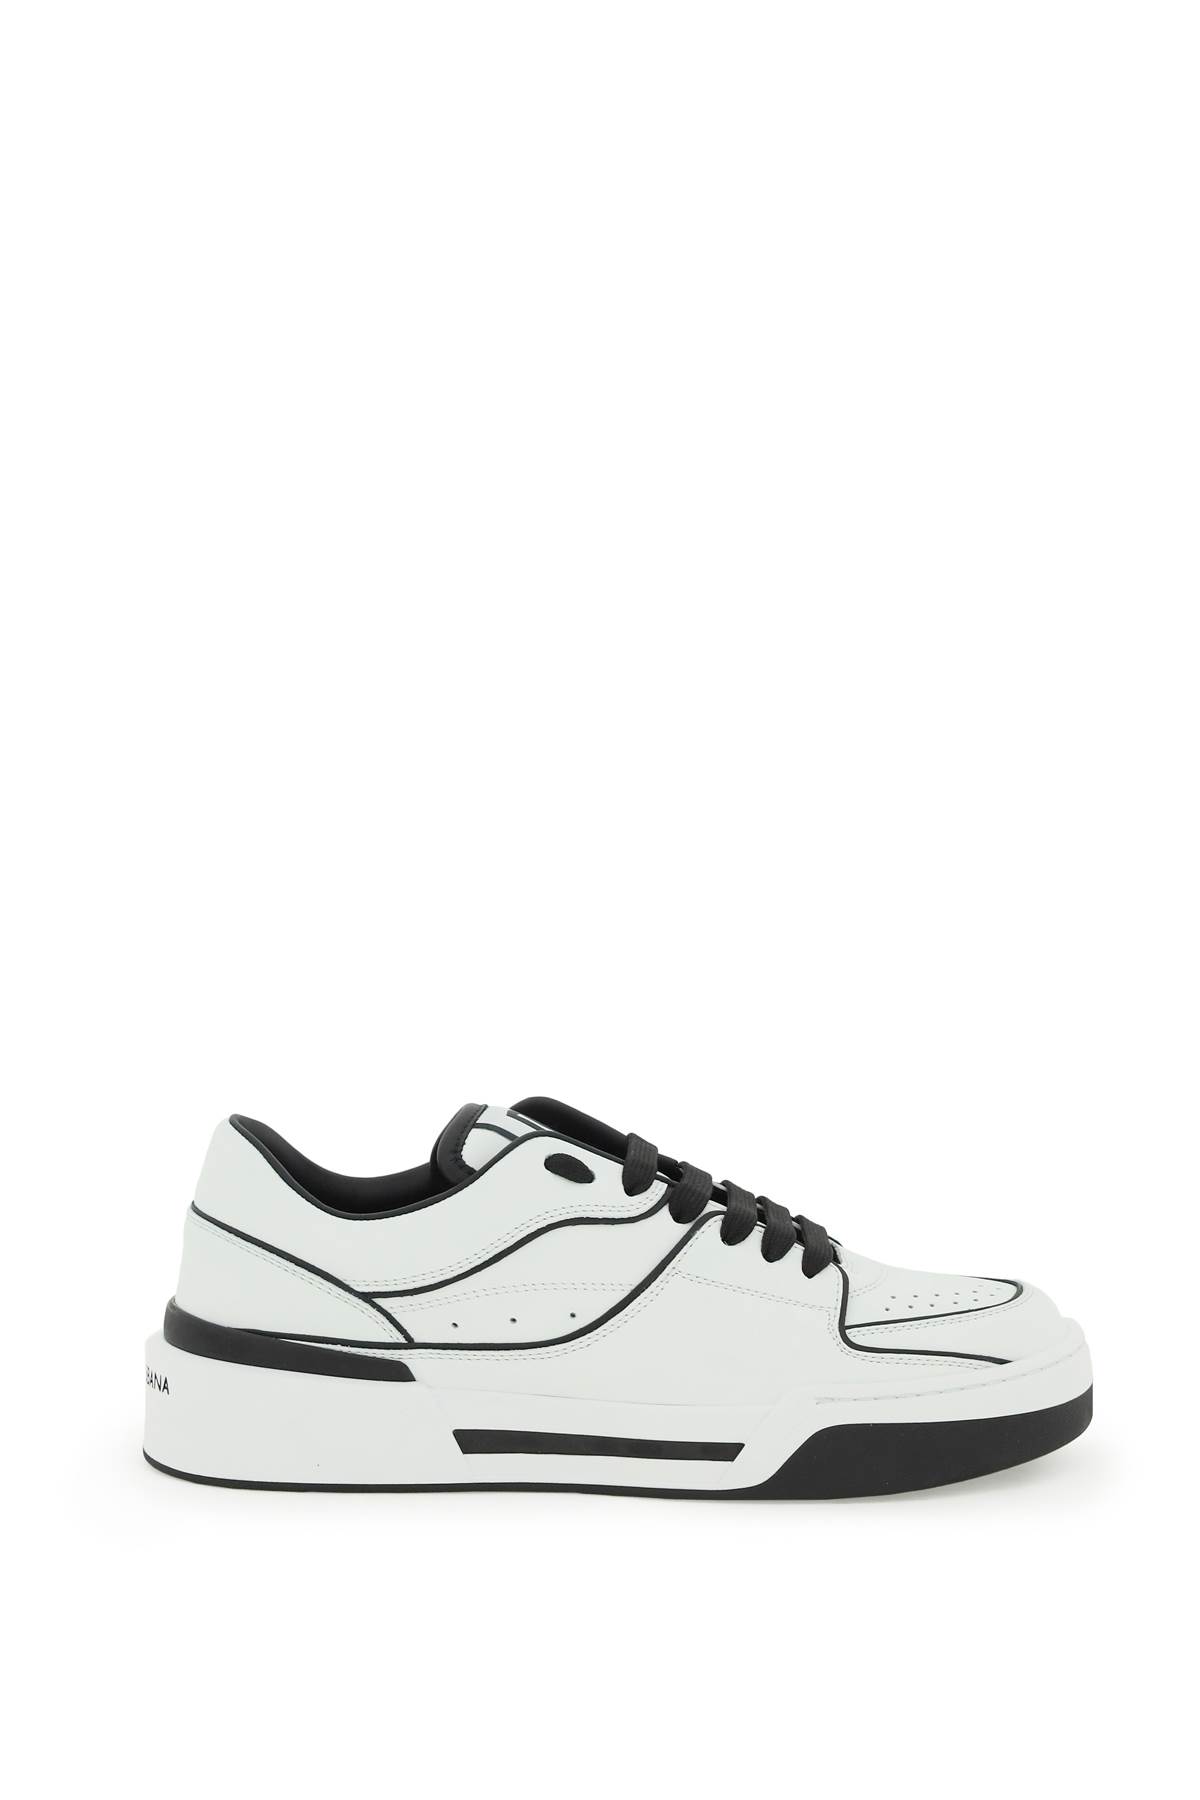 Dolce & Gabbana new Roma Leather Sneakers